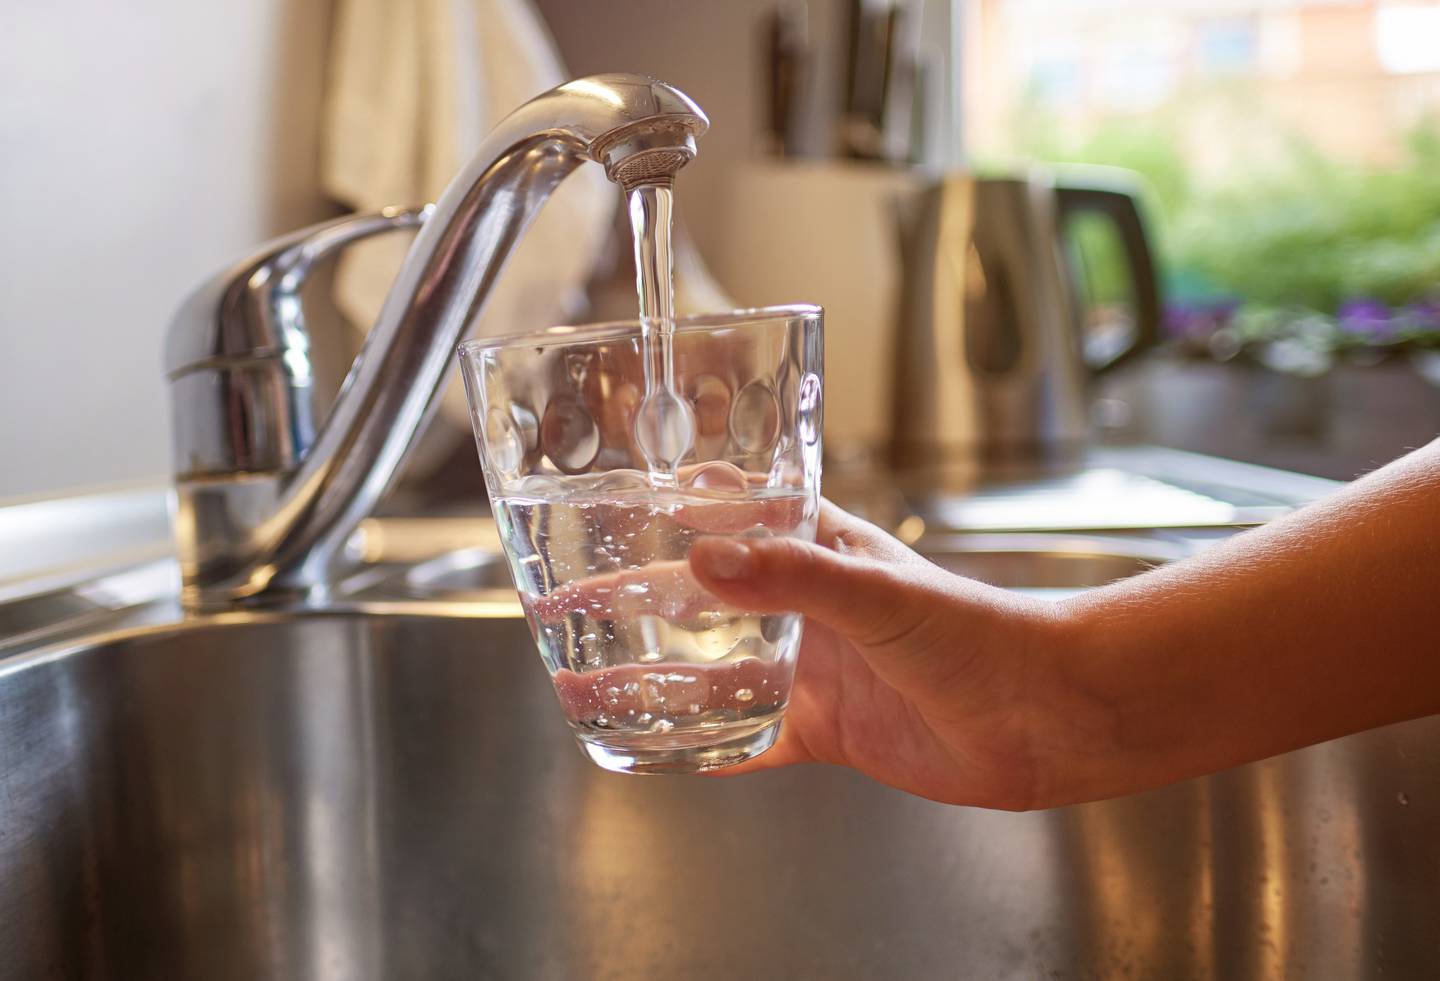 Want to pouring a fresh glass of tap water? Officials say ‘Forever chemicals’ have long been in our tap water.